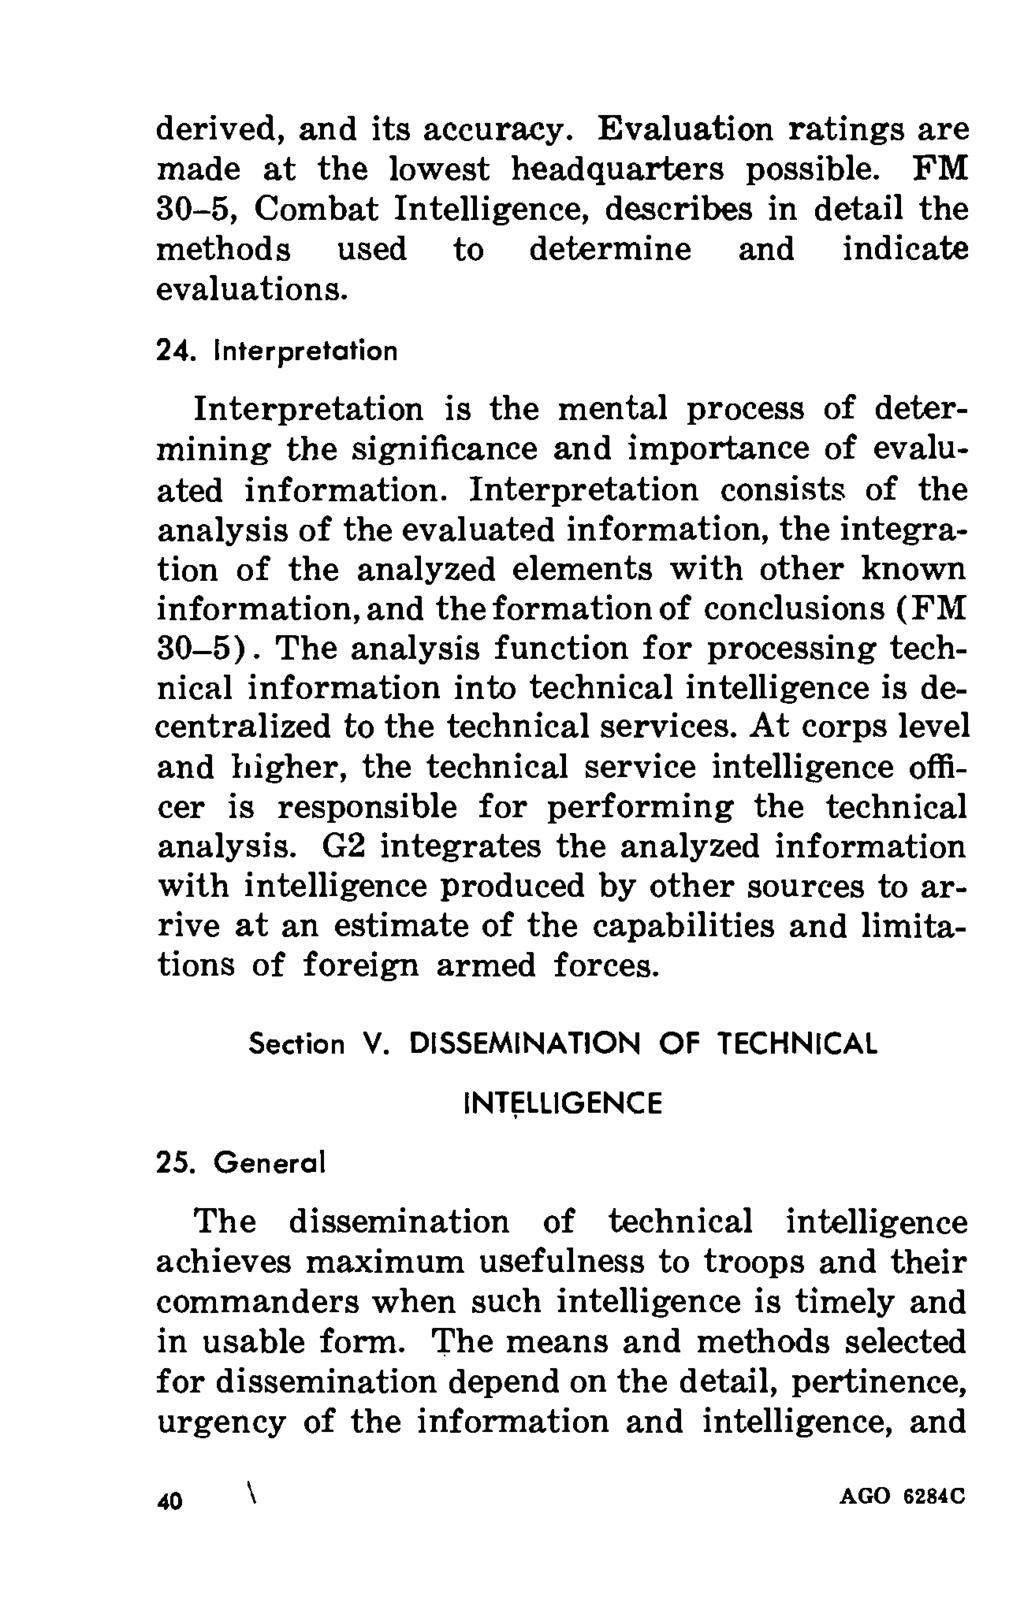 derived, and its accuracy. Evaluation ratings are made at the lowest headquarters possible. FM 30-5, Combat Intelligence, describes in detail the methods used to determine and indicate evaluations.